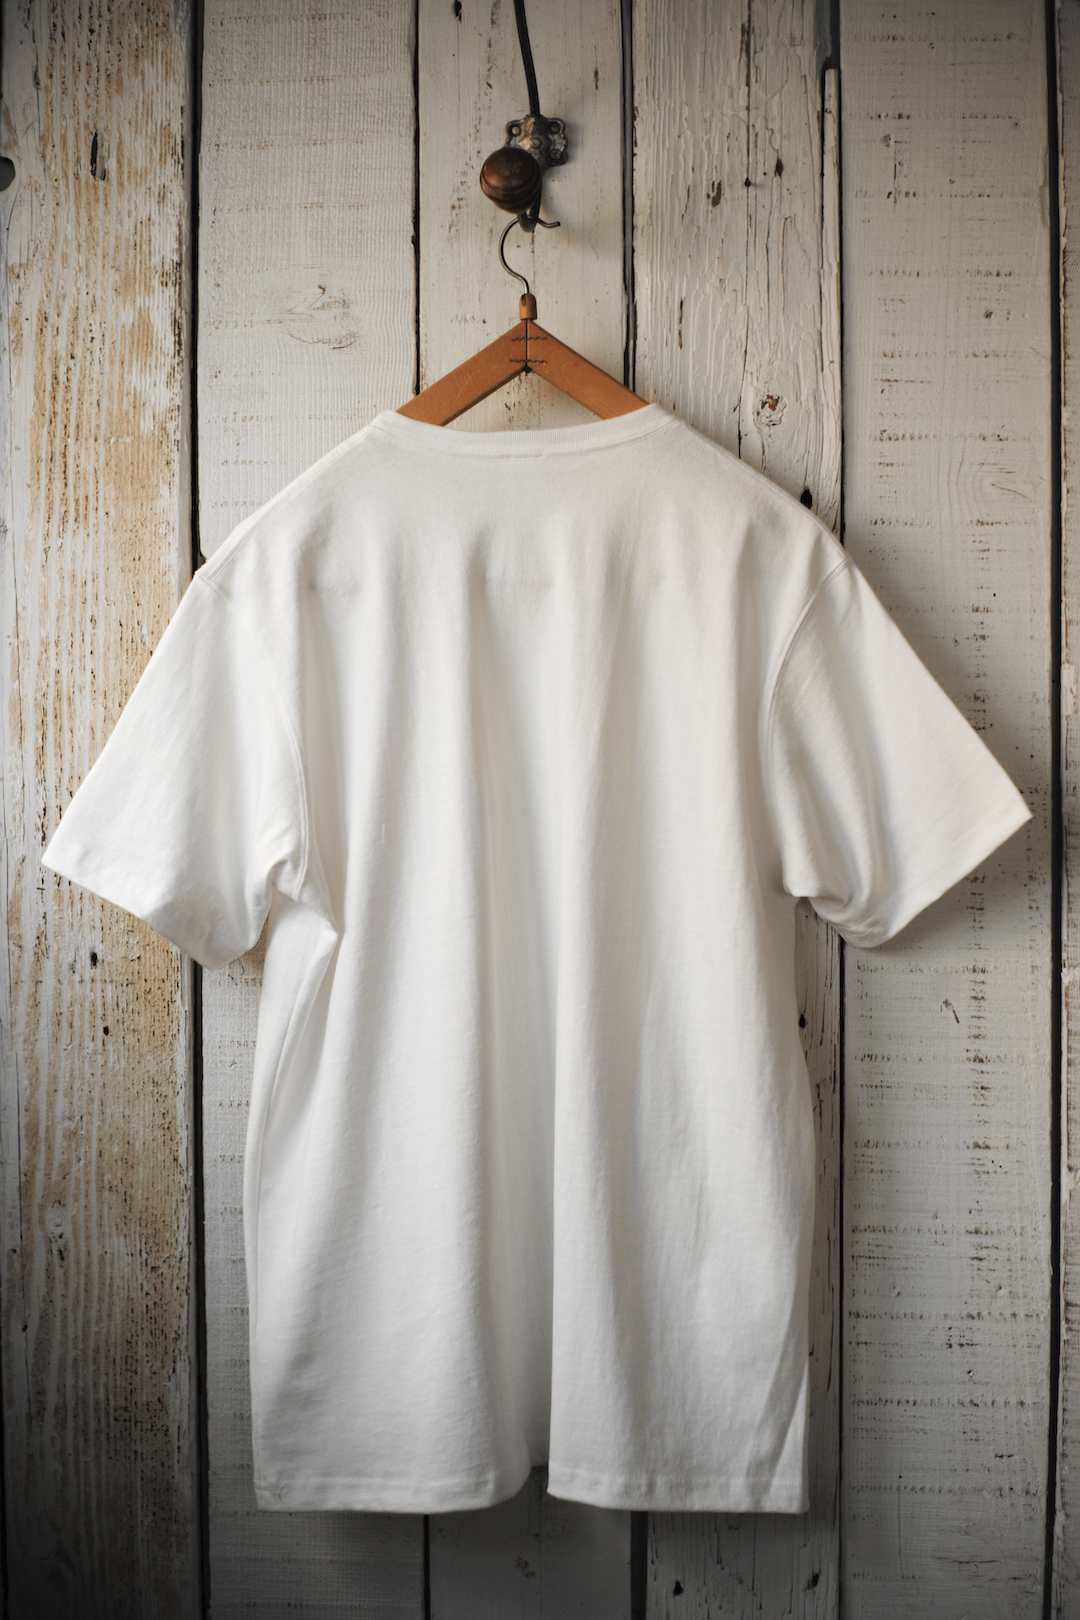 WHITE T-SHIRT MADE IN U.S.A